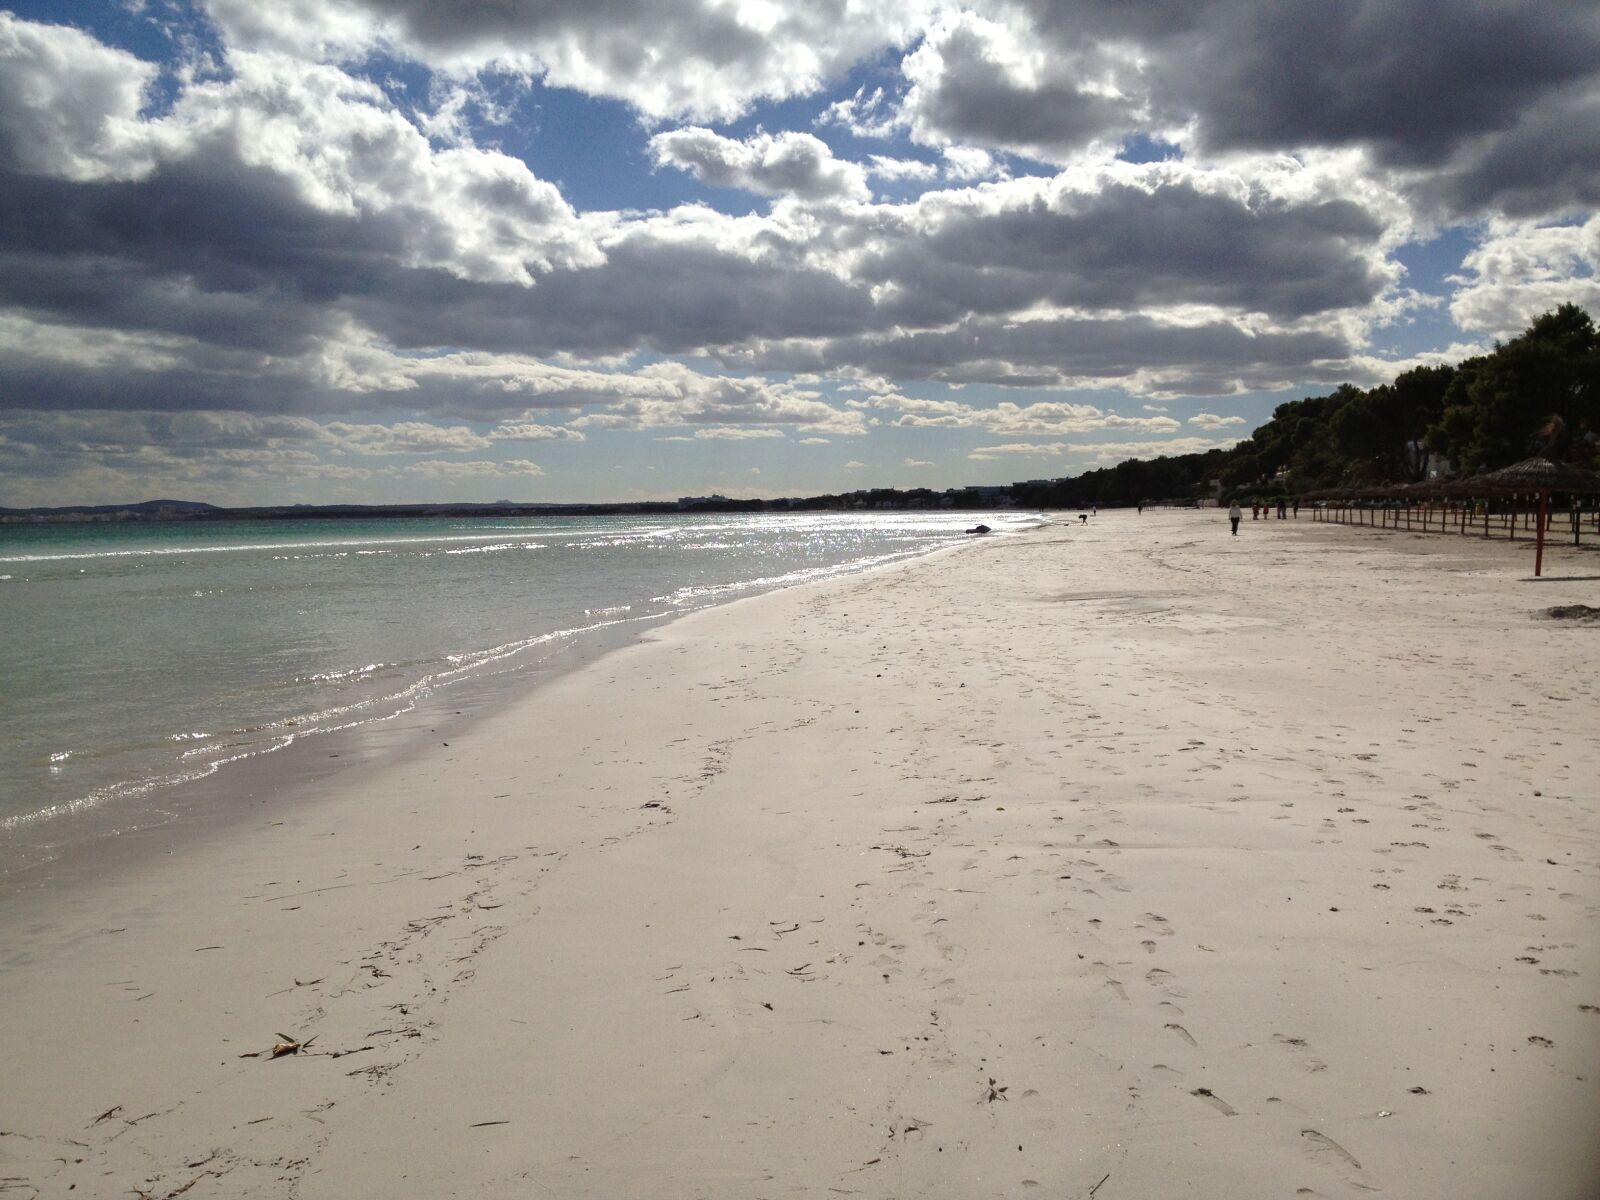 Apple iPhone 4S sample photo. Alcudia beach, clouds, more photography